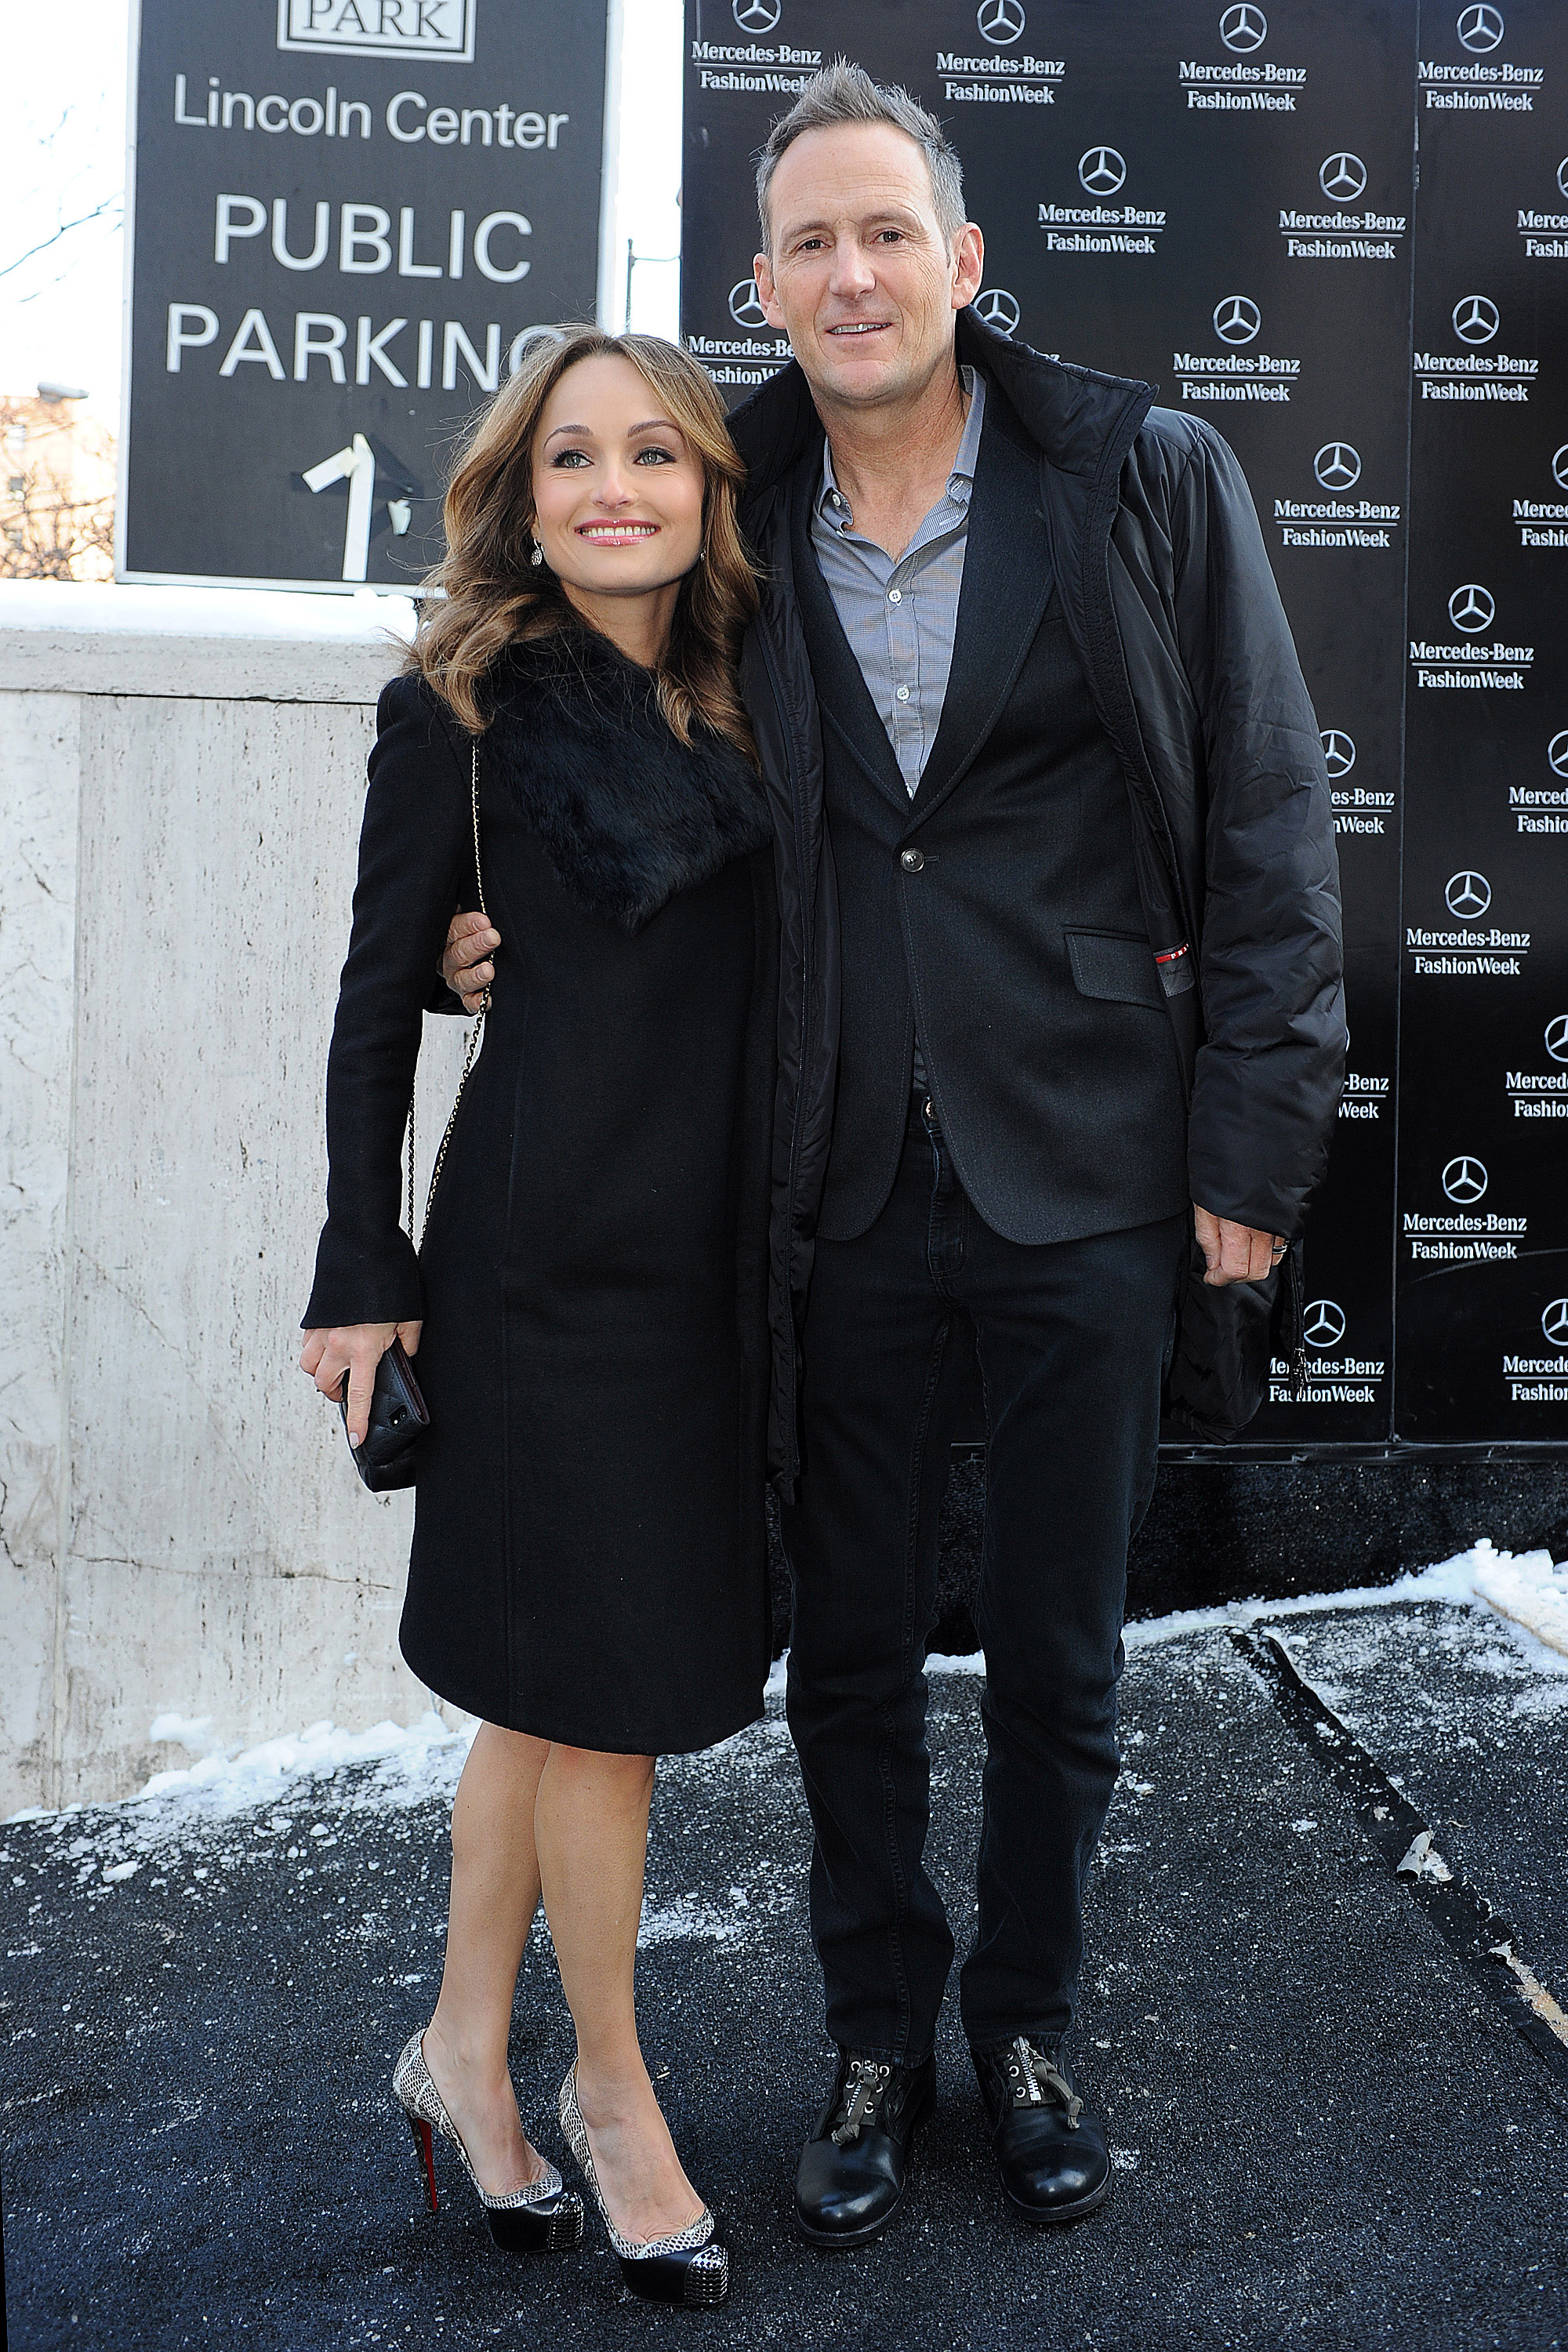 Giada DeLaurentiis and Todd Thompson at Lincoln Center for the Performing Arts on February 6, 2014, in New York City. | Source: Getty Images